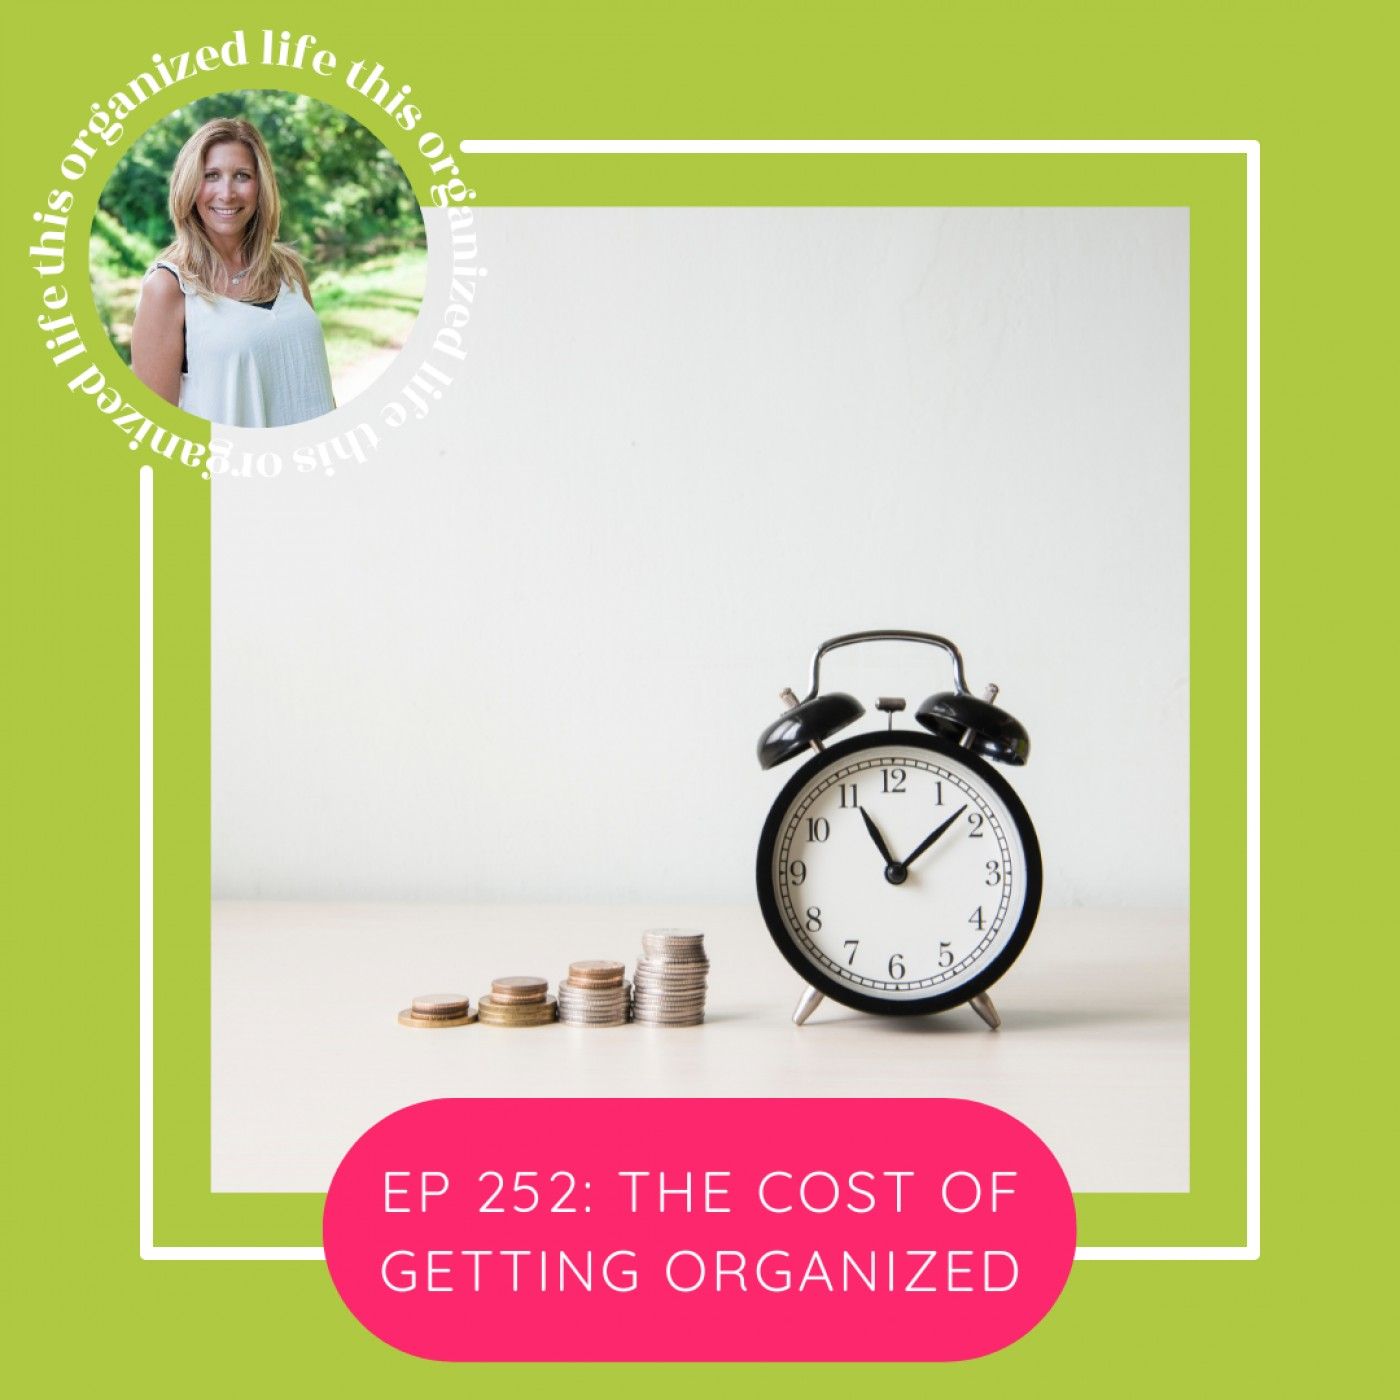 ep 252: The Cost of Getting Organized